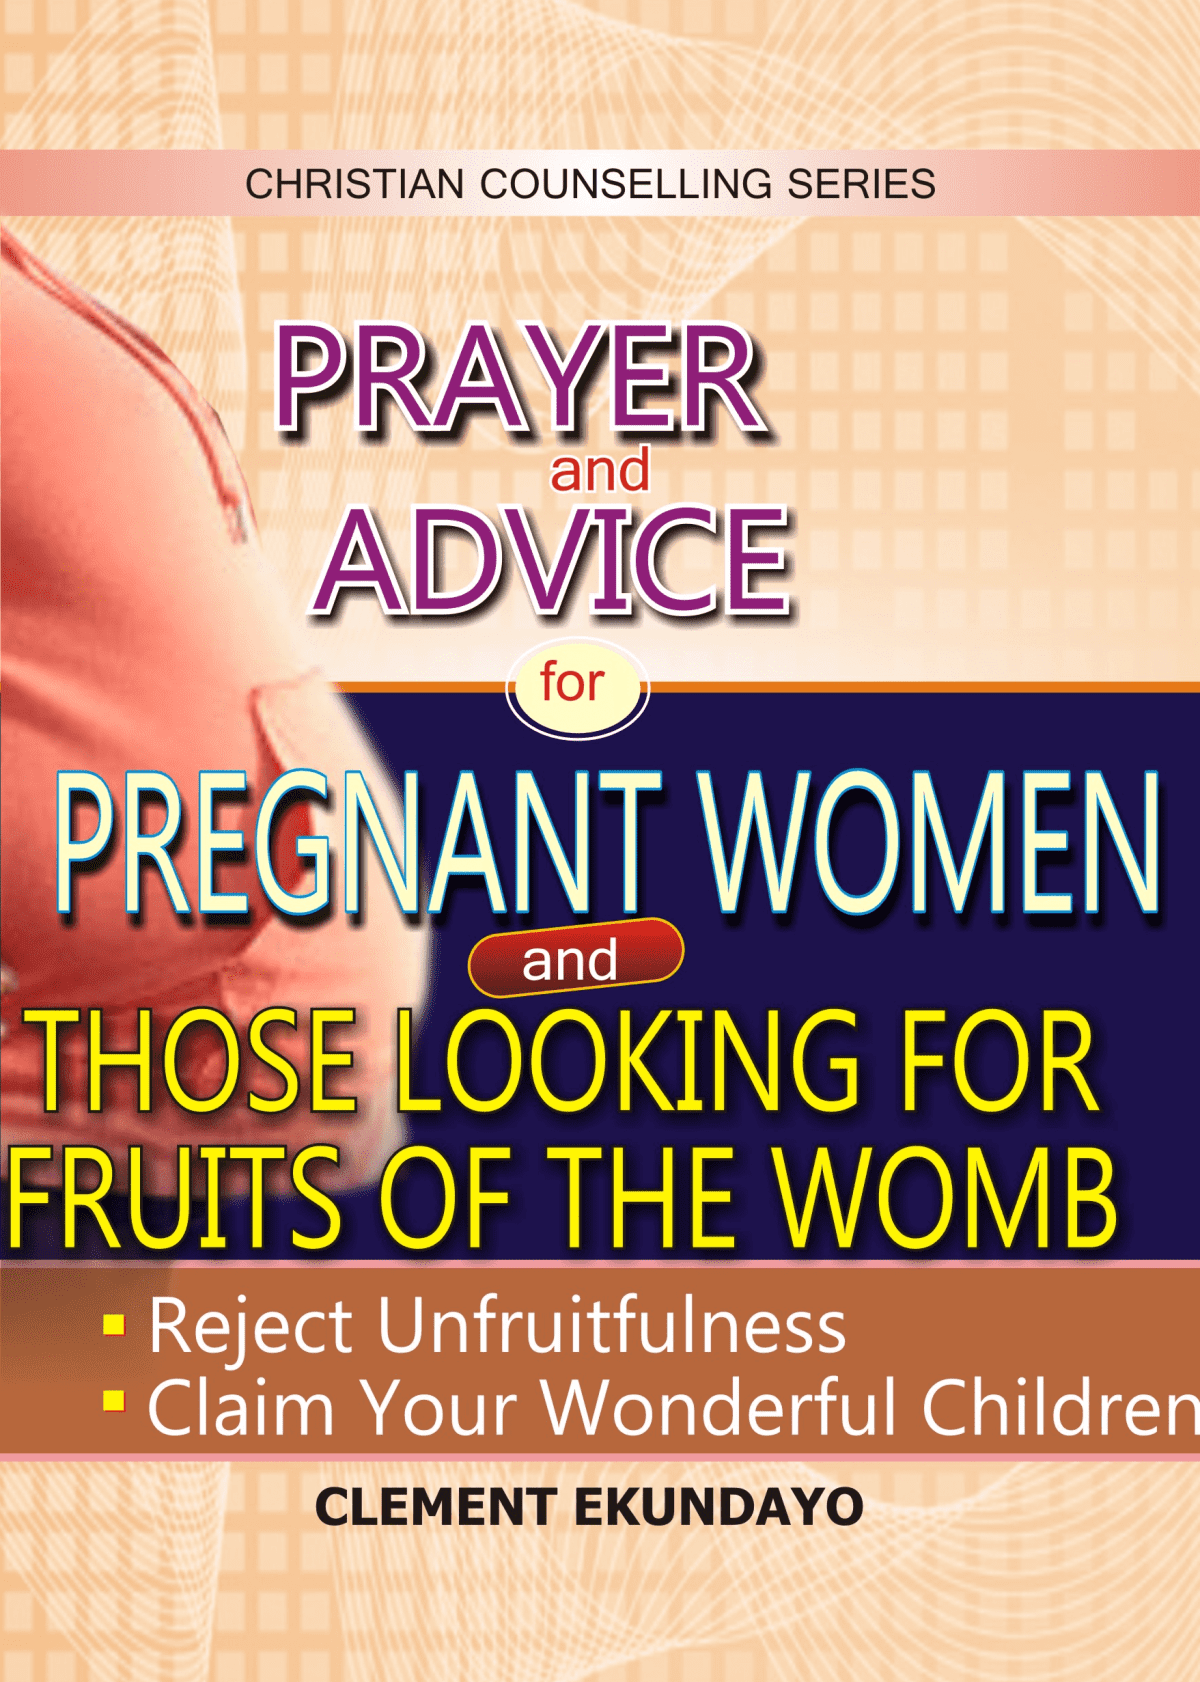 ADVICE AND PRAYER FOR THOSE LOOKING FOR FRUITS OF THE WOMB